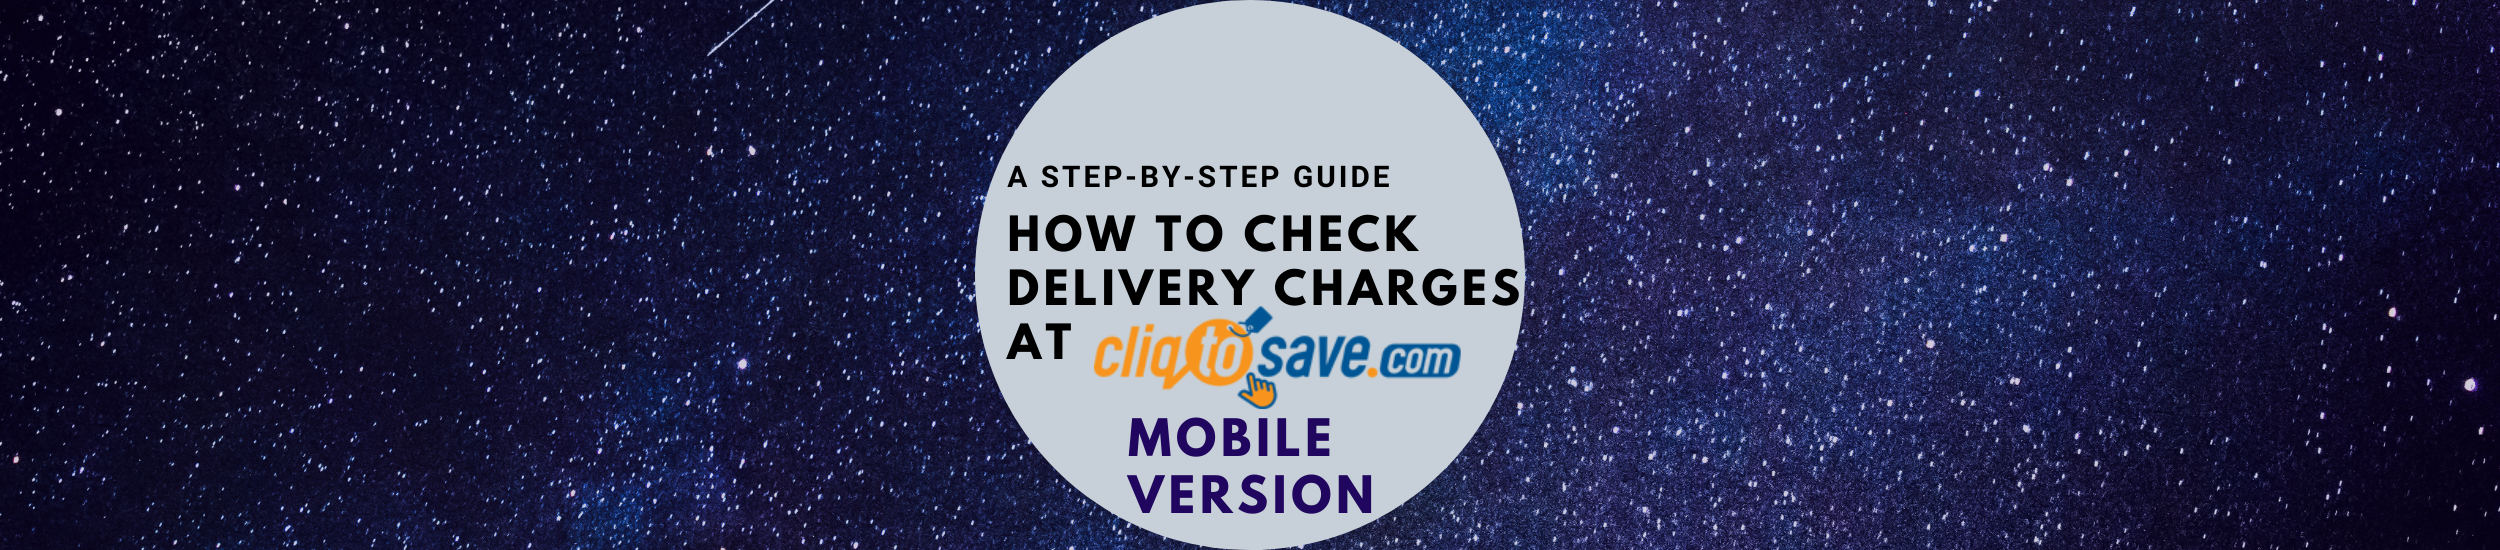 How to Check Delivery Charges (Mobile Version)